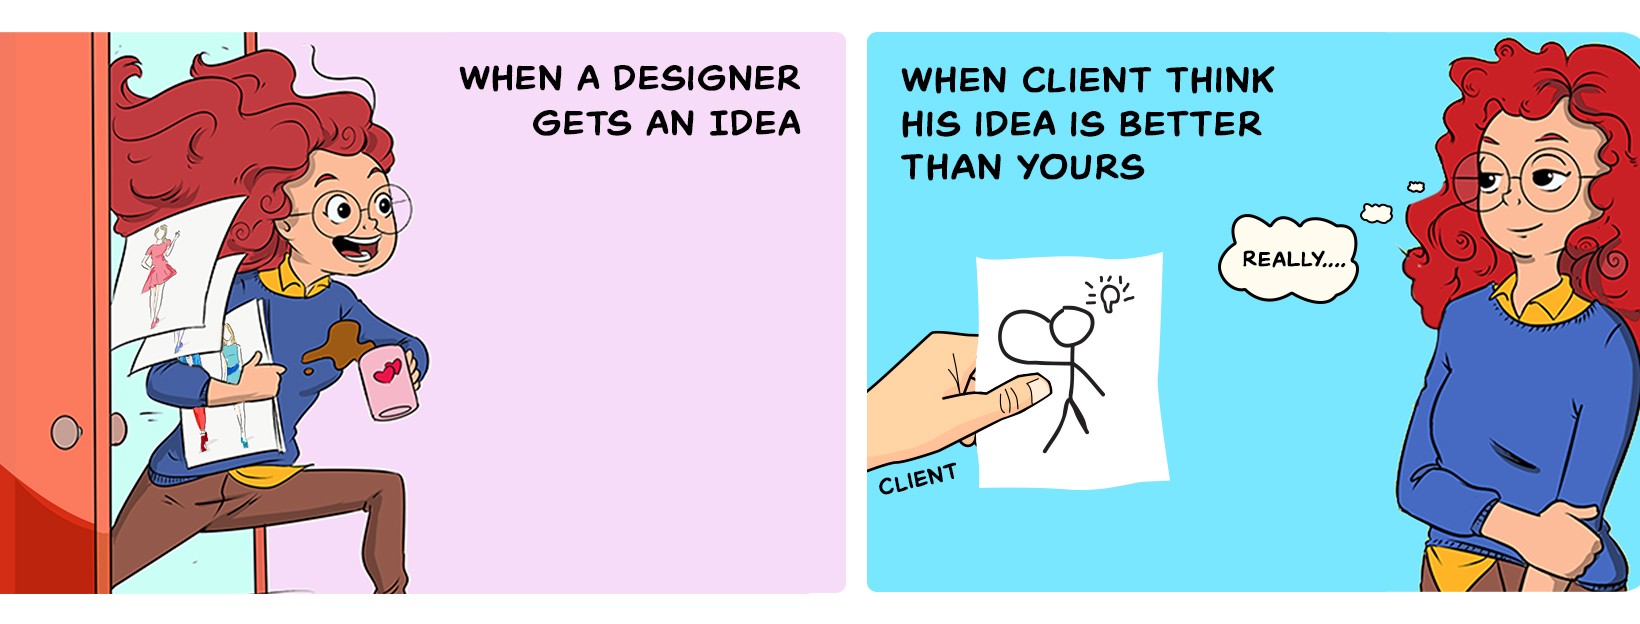 When a designer gets an idea, when client think his idea is better than yours